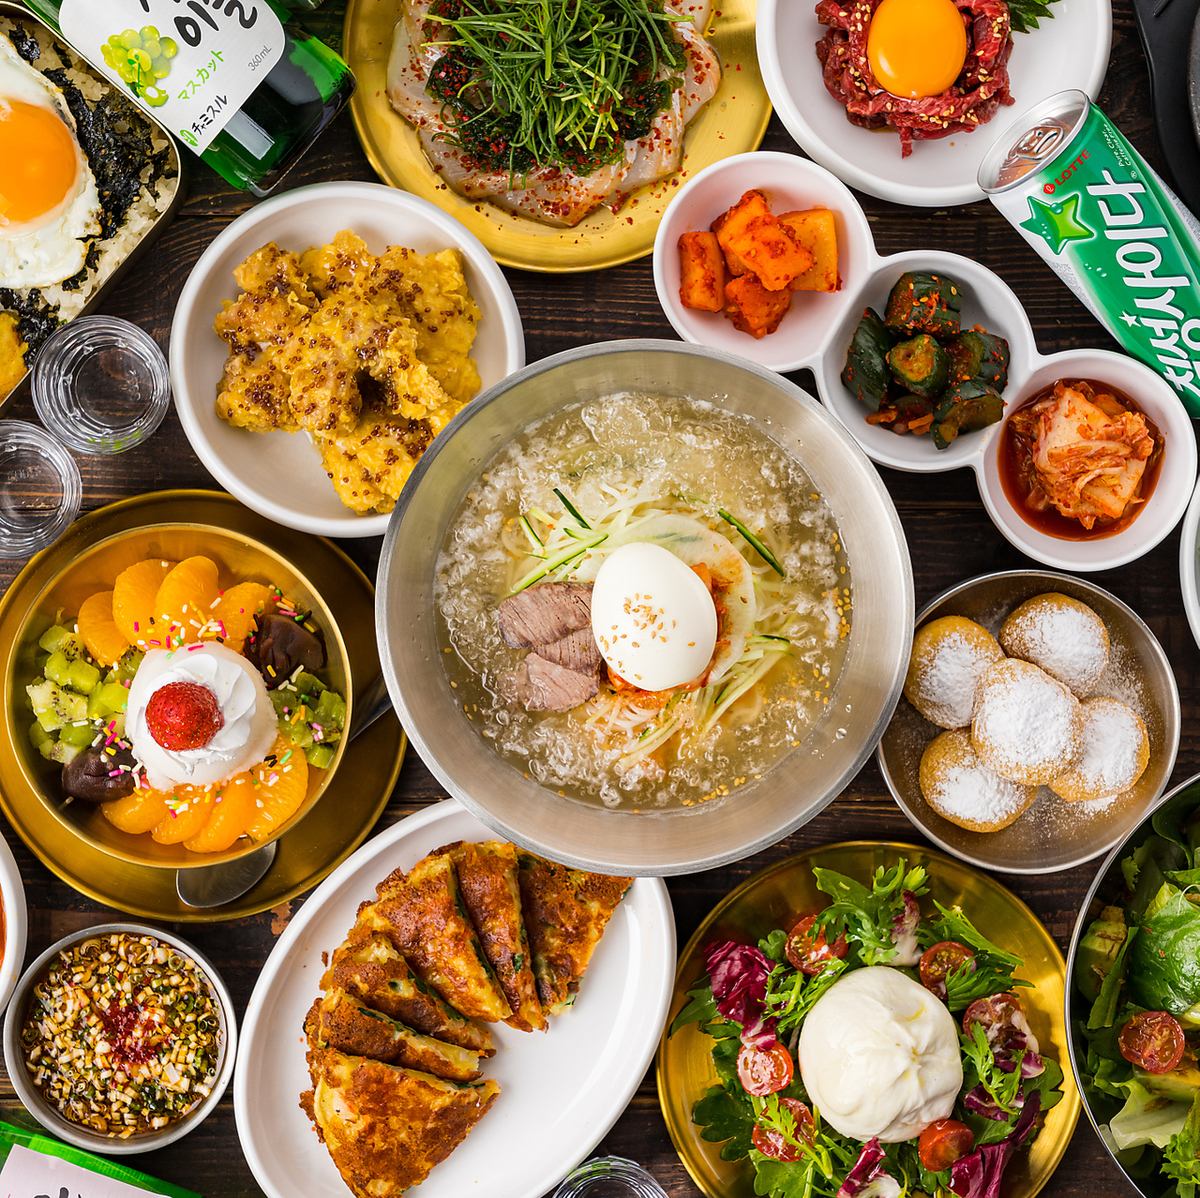 Here is where you can enjoy the authentic Korean taste in Umeda in a fashionable space!